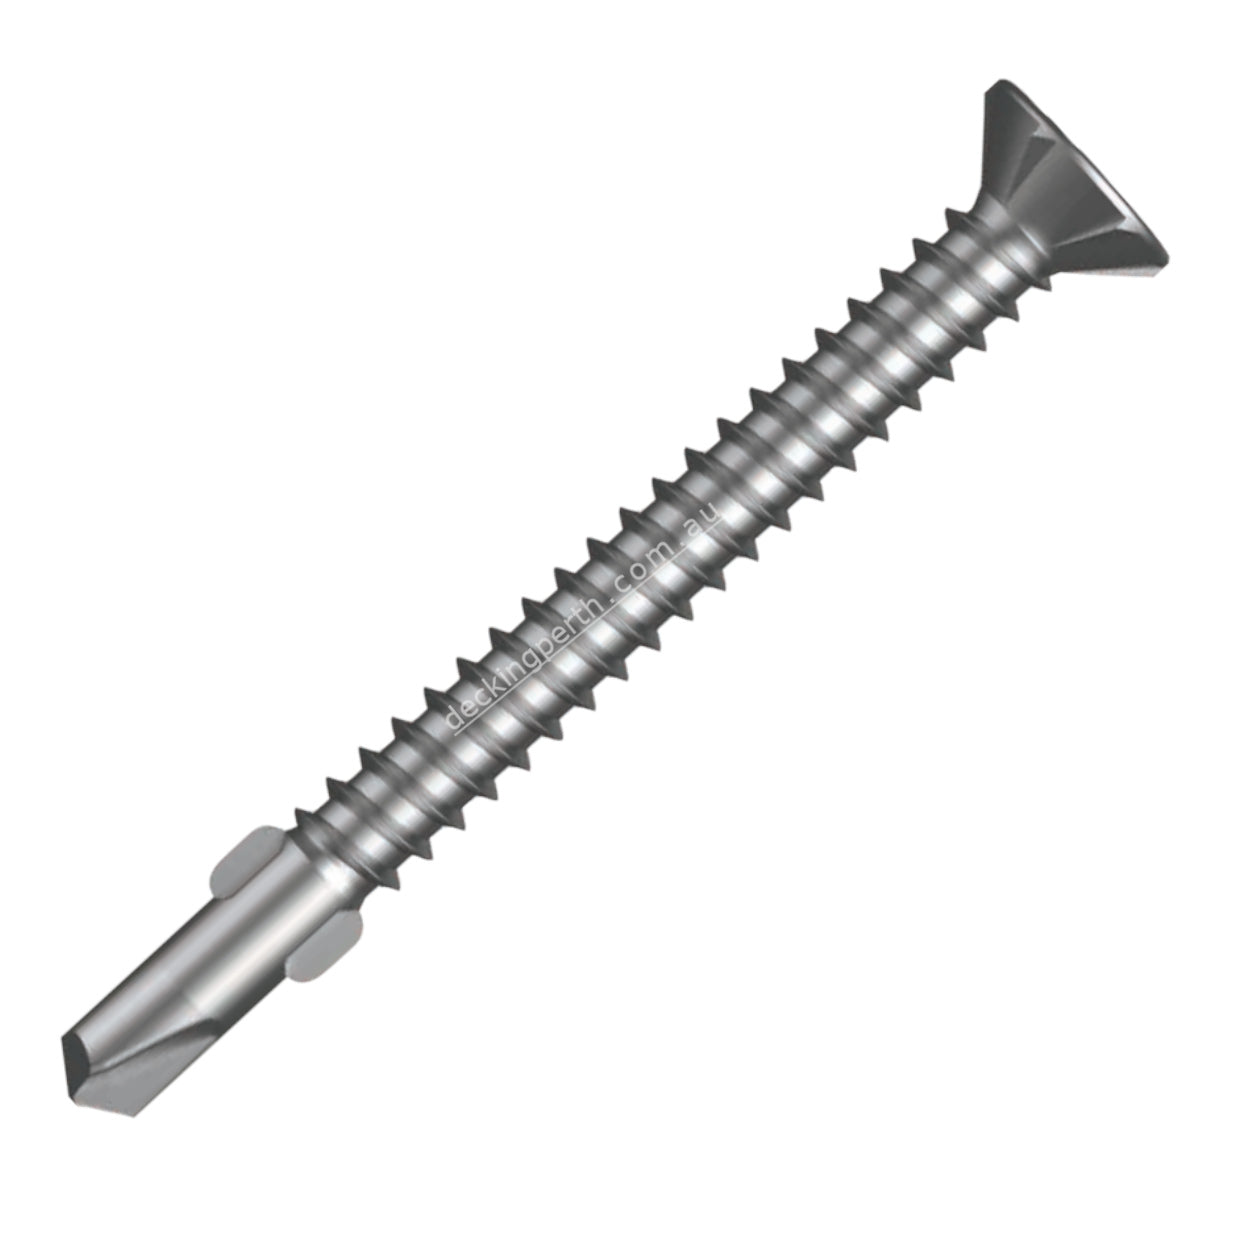 HOBSON - Steel Frame Decking Screws, Self Drilling 10g x 50mm Winged Point, Countersunk Head, 304SS SQ2 Drive